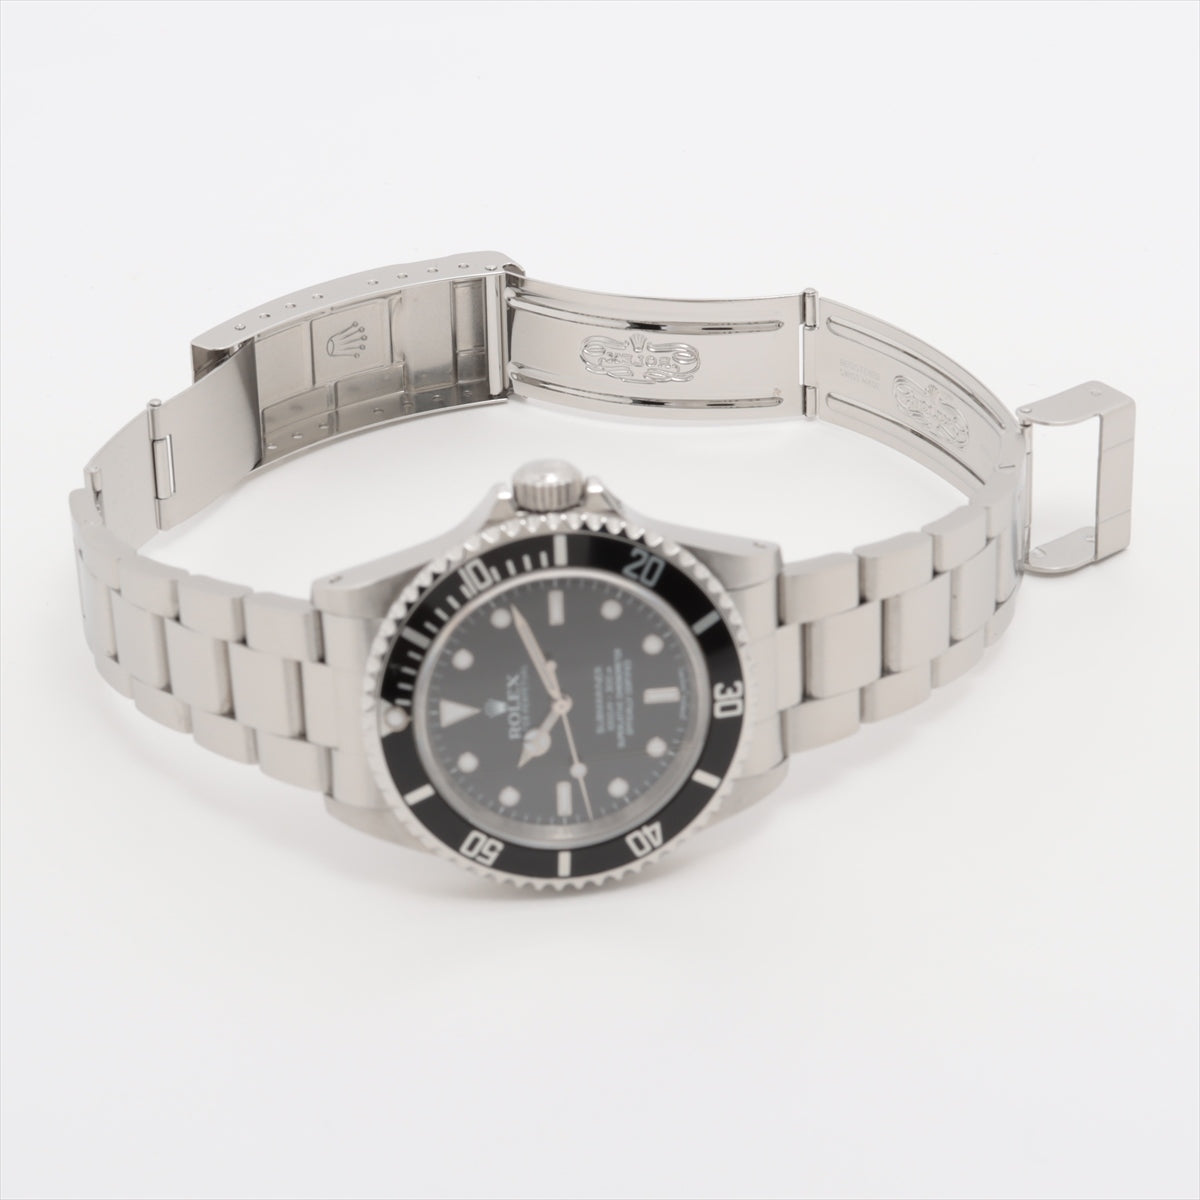 Rolex Submariner 14060M G220641 SS AT Black-Face Total number of links 12 Extra Link 2